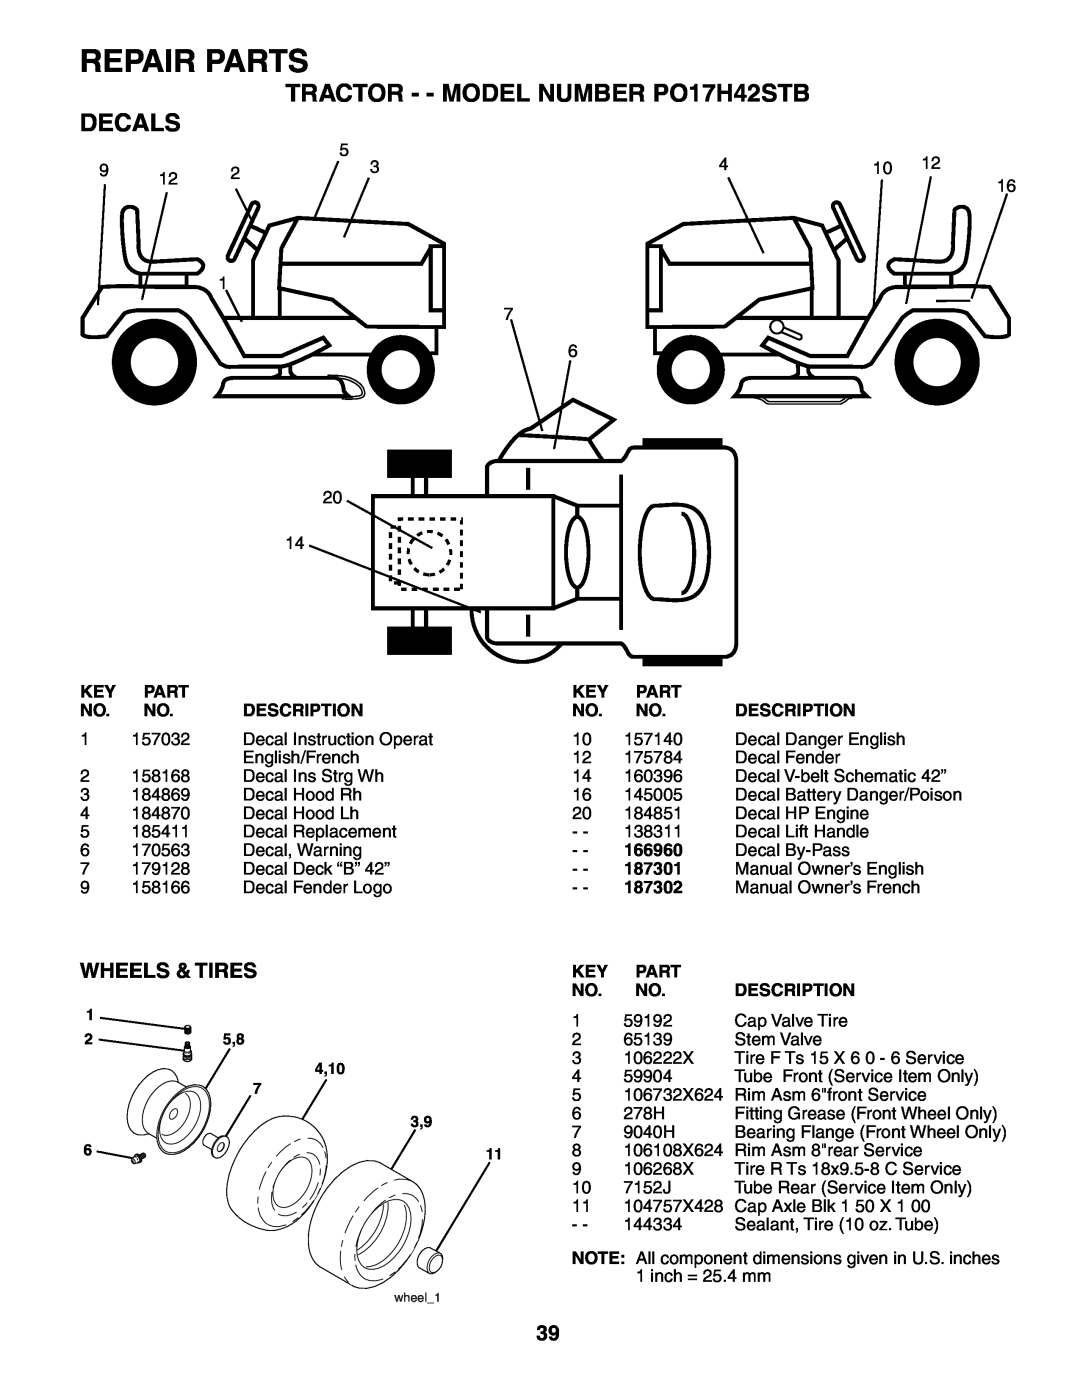 Poulan manual TRACTOR - - MODEL NUMBER PO17H42STB DECALS, Wheels & Tires, Repair Parts 